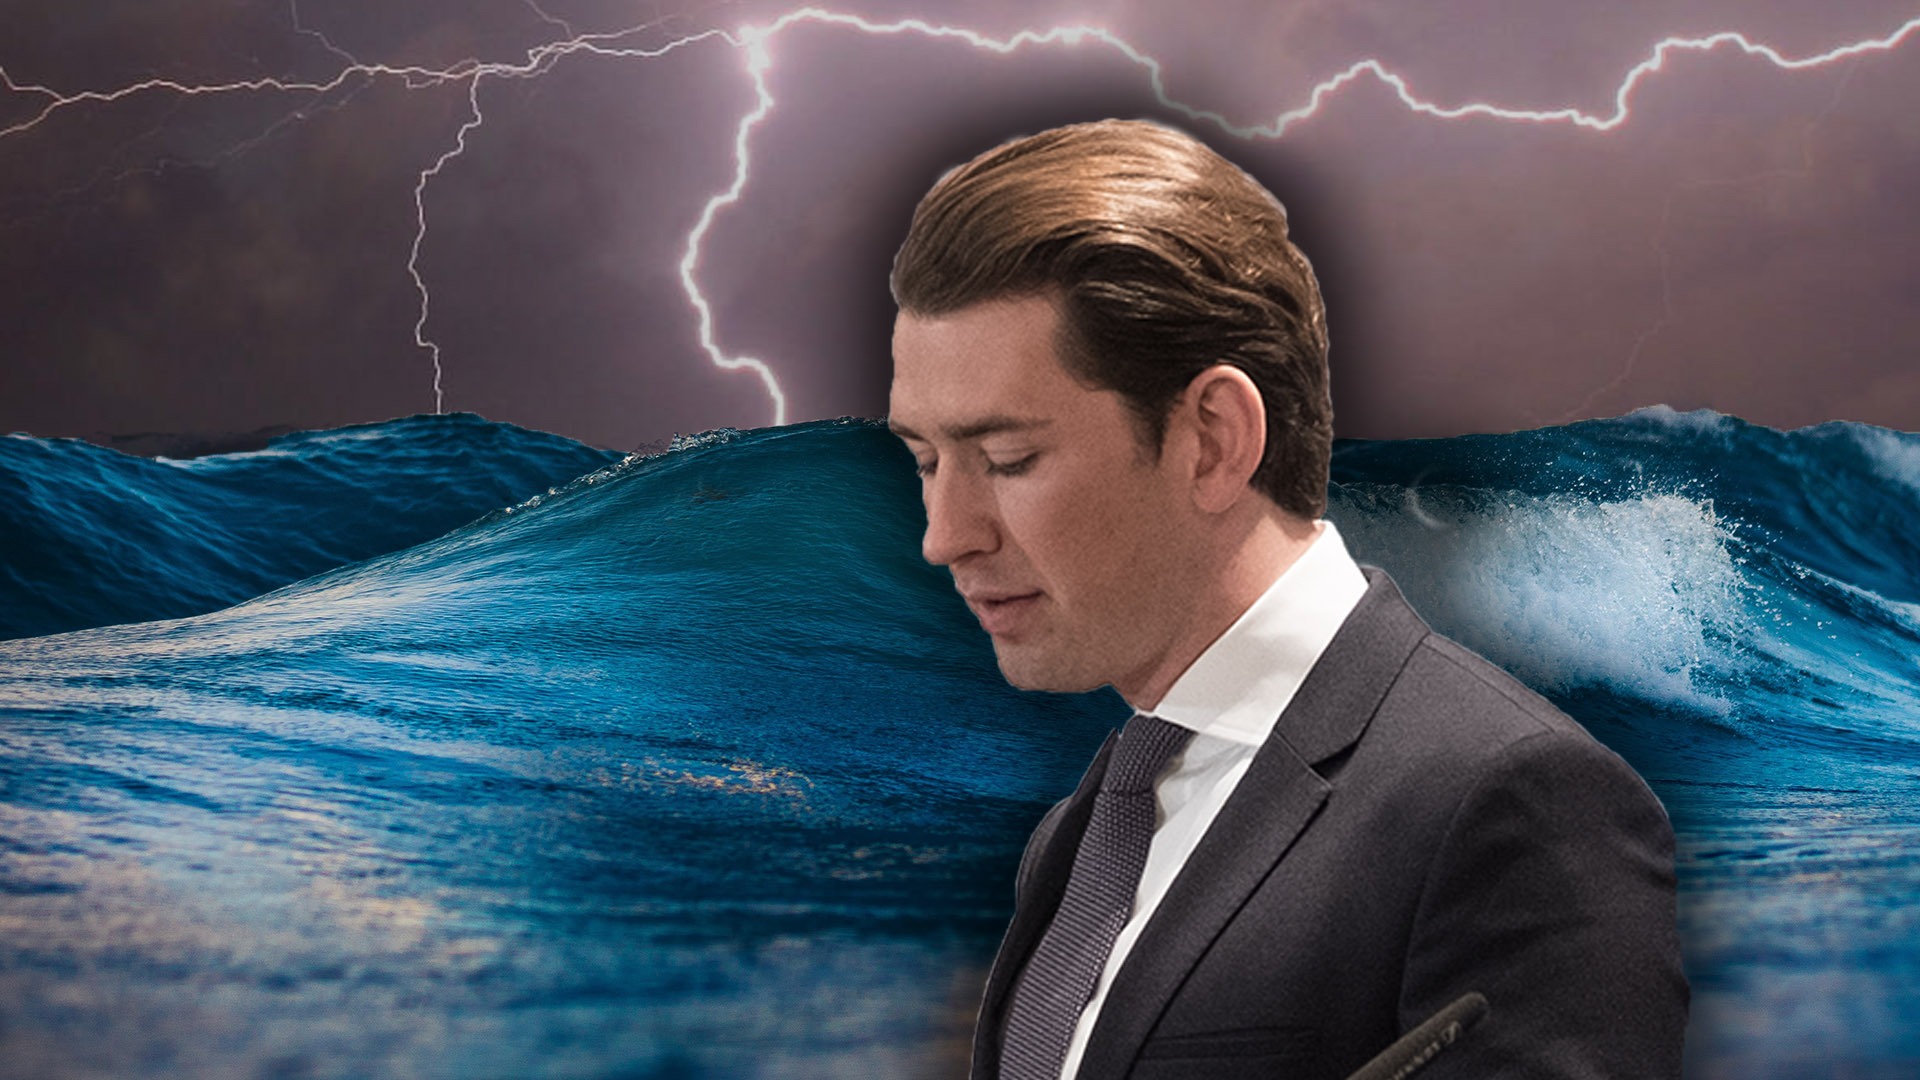 Kurz-ÖVP climate policy benefits the richest and contradicts science